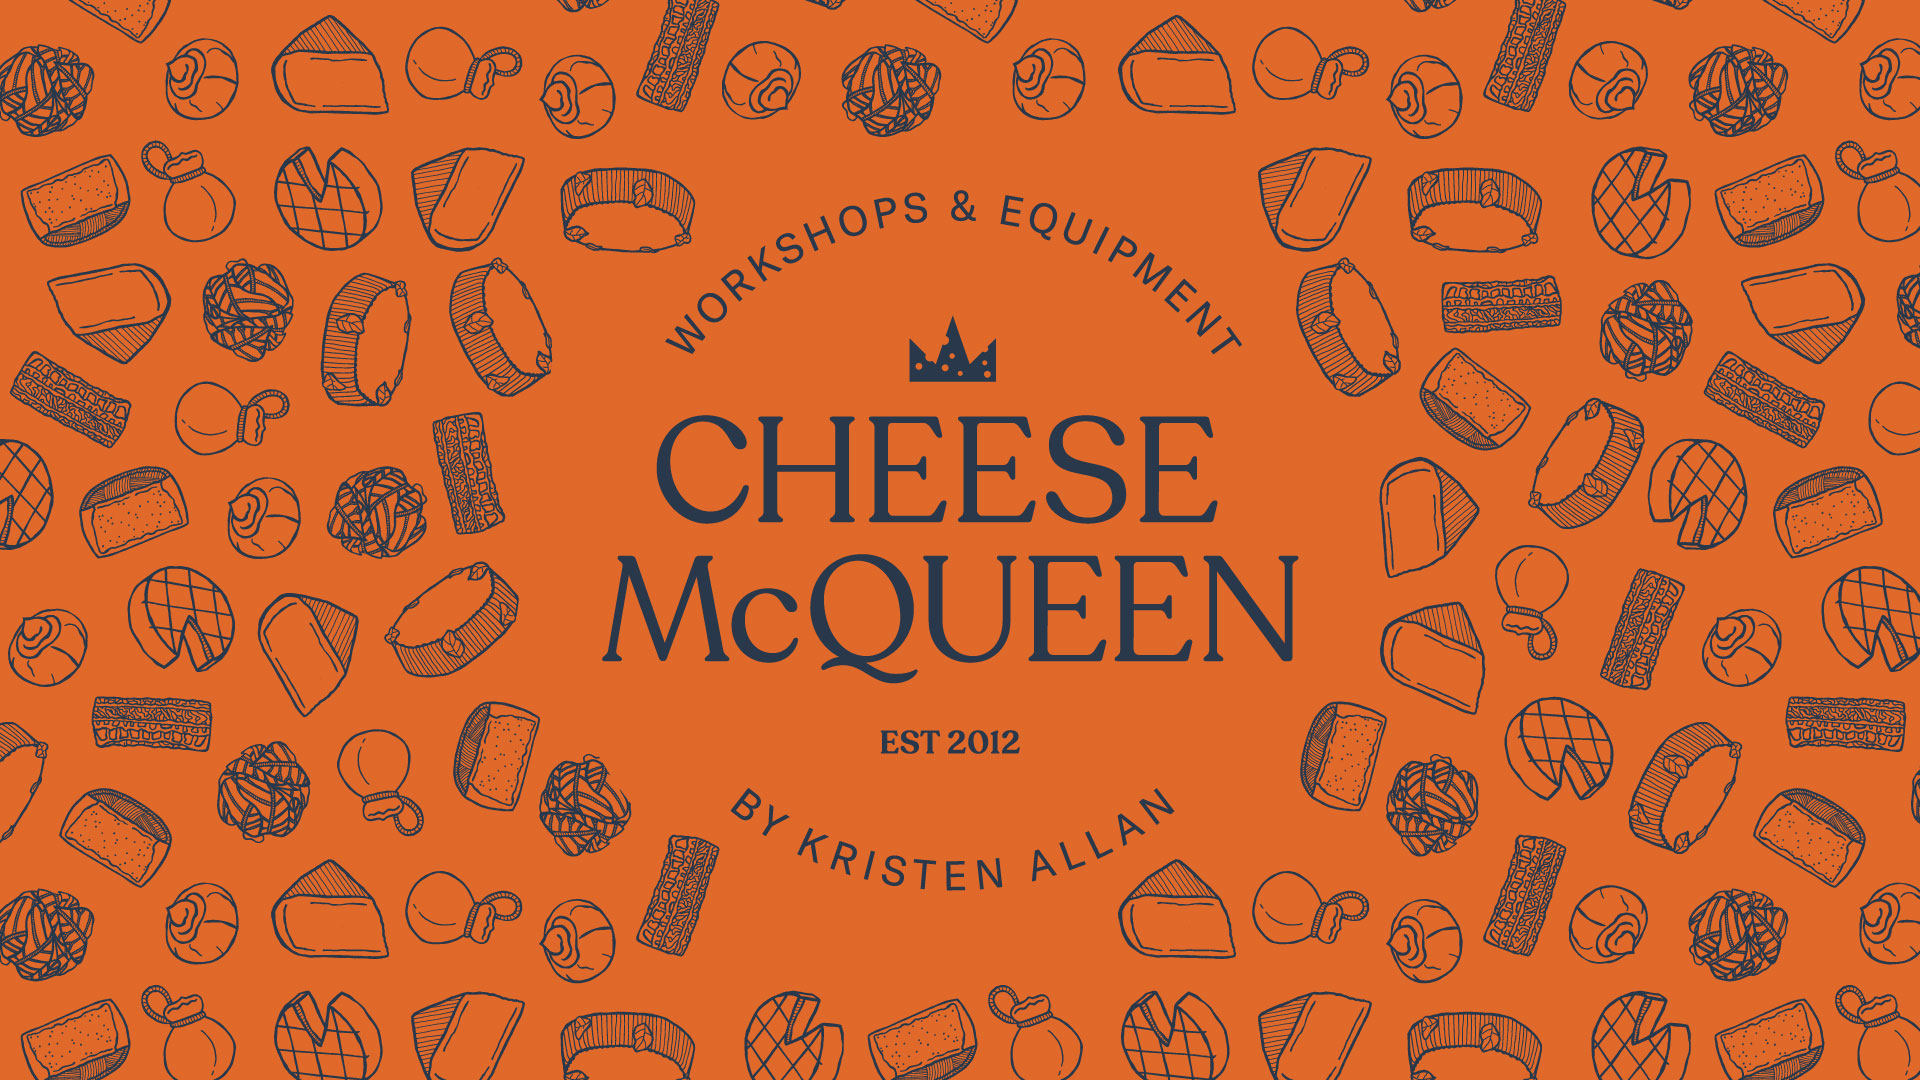 Cheese McQueen logo and patterned illustration